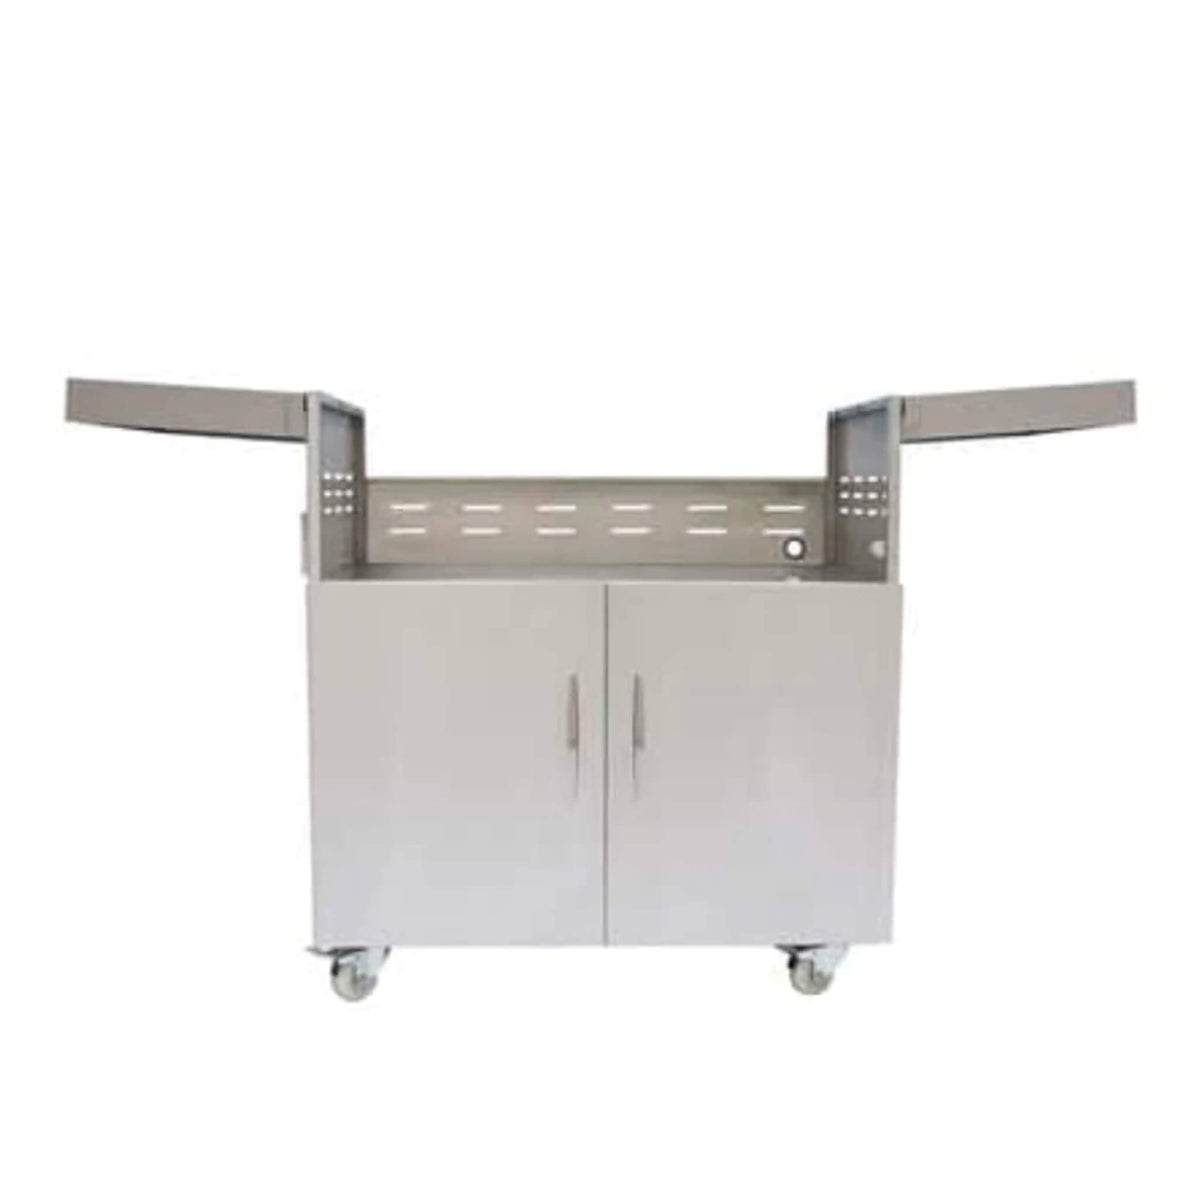 Coyote 36&quot; Built-In Charcoal Grill